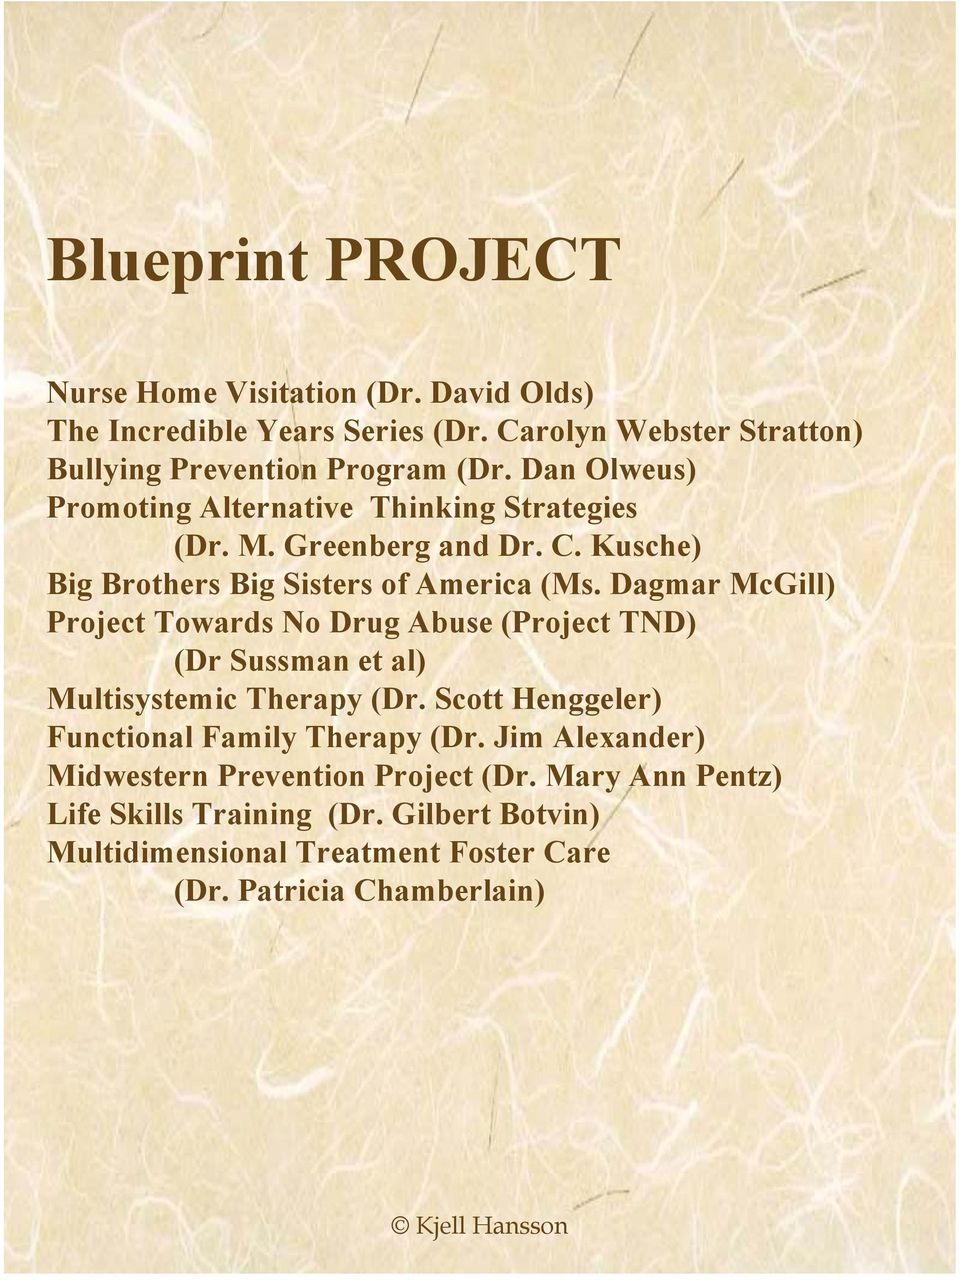 Dagmar McGill) Project Towards No Drug Abuse (Project TND) (Dr Sussman et al) Multisystemic Therapy (Dr. Scott Henggeler) Functional Family Therapy (Dr.